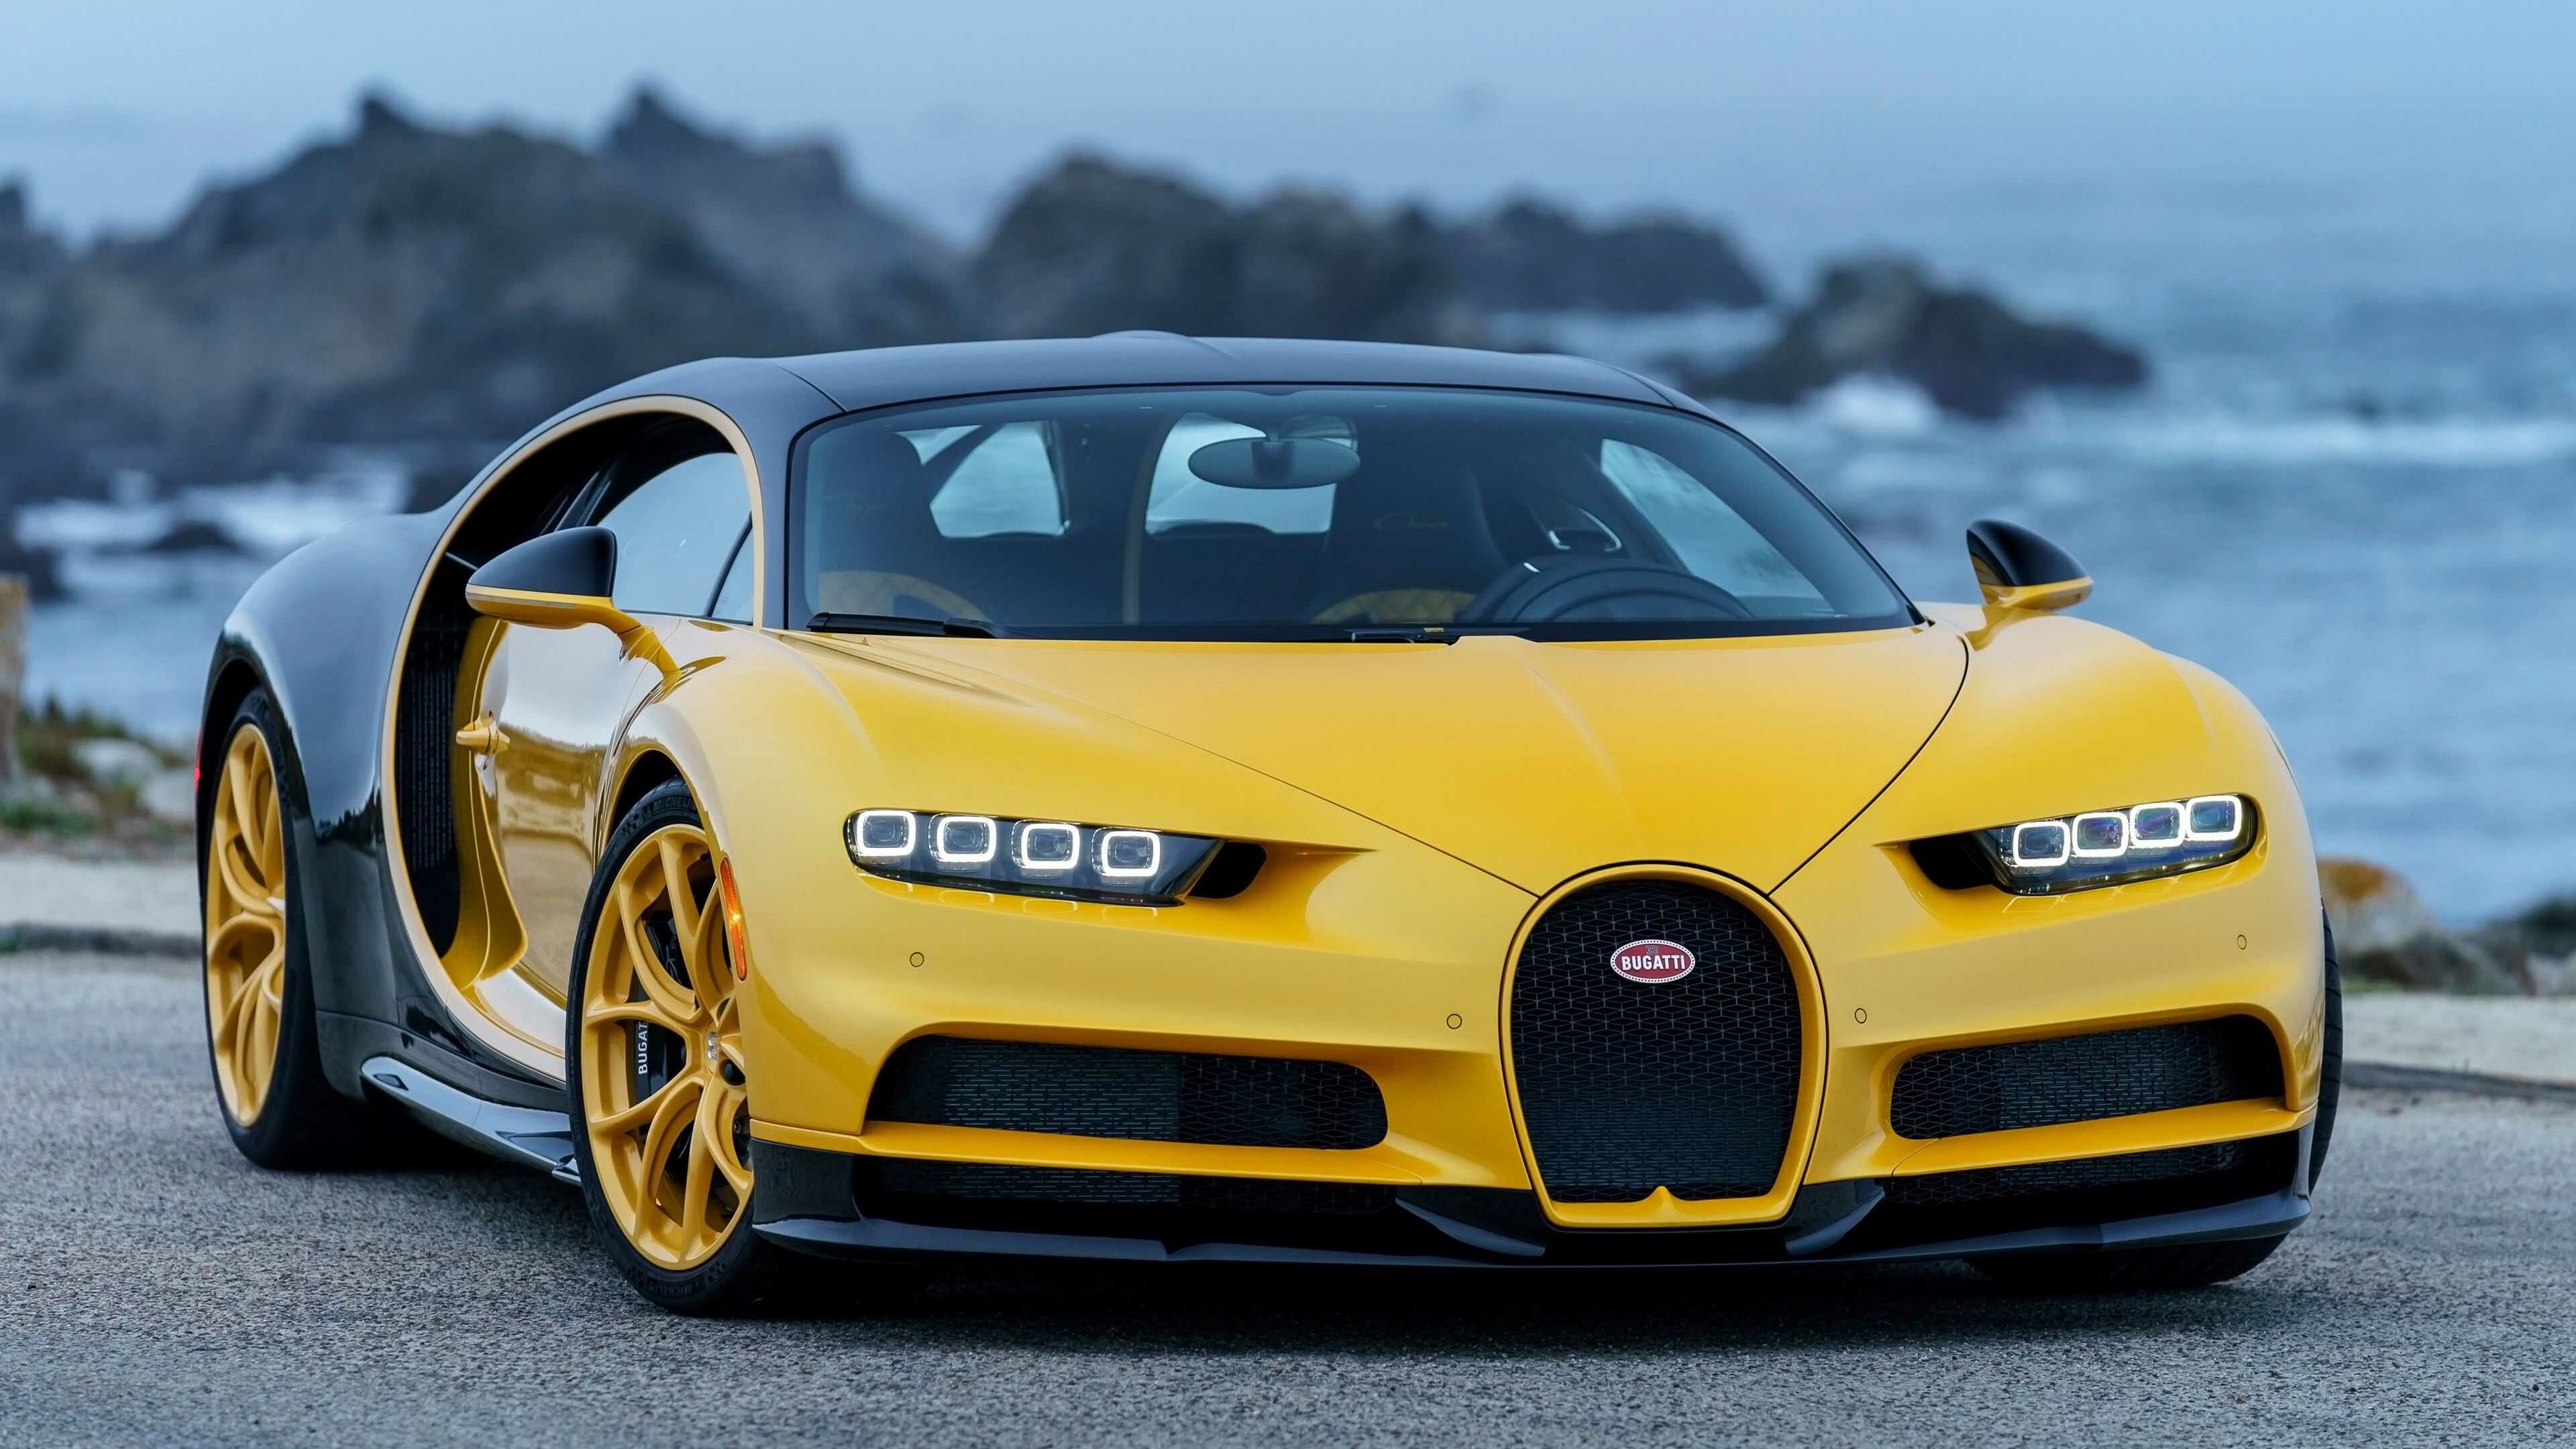 Bugatti: Chiron, A German then French manufacturer of high-performance automobiles. 3840x2160 4K Wallpaper.